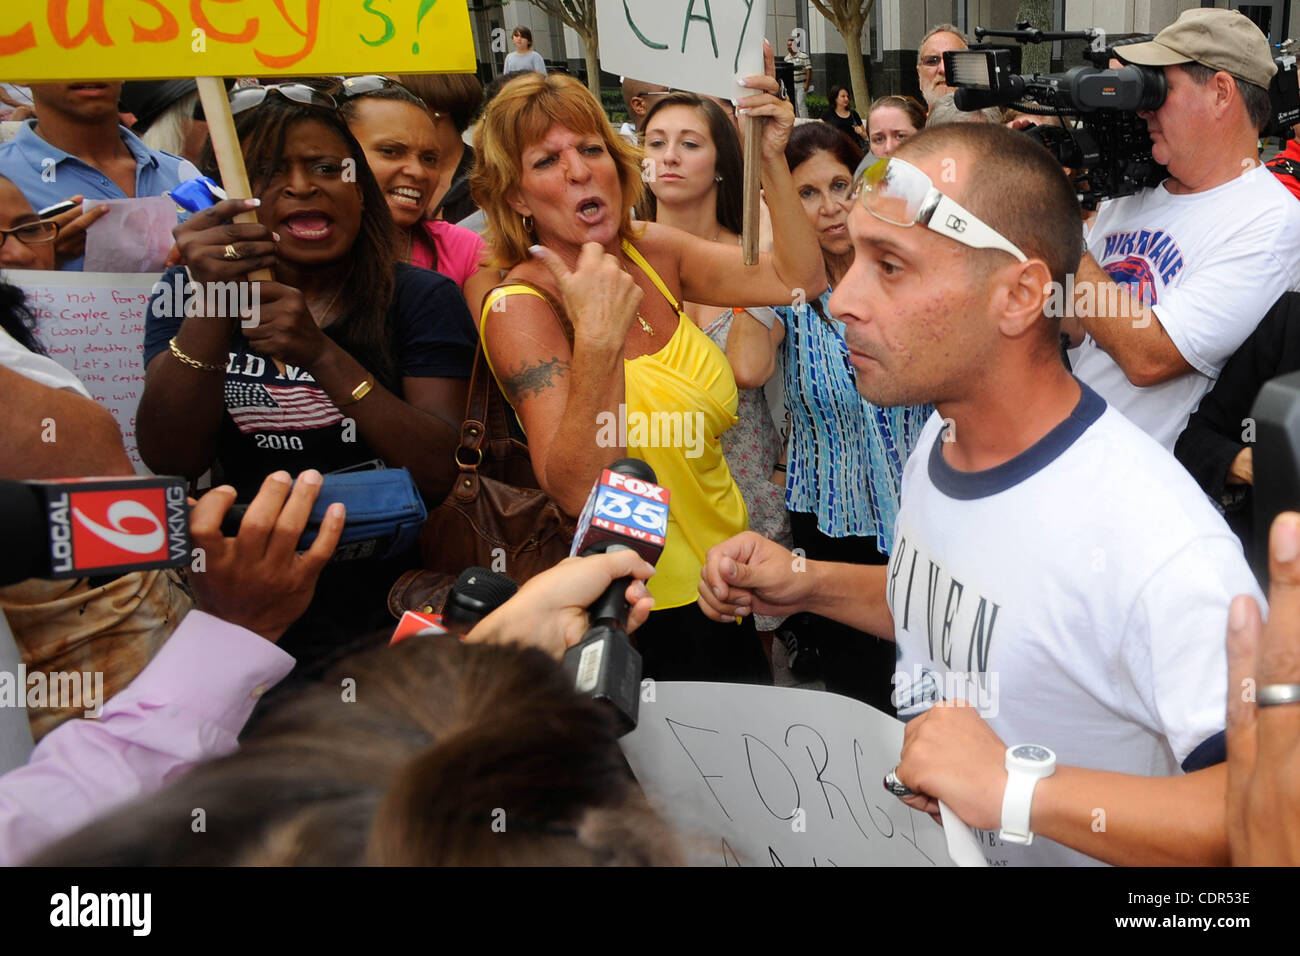 A pro-Casey Anthony supporter is shouted down by anti-Anthony protesters during sentencing outside the Orange County July 7, 2011 in Orlando, FL.  (J.B. Skipper/ZUMA) Stock Photo